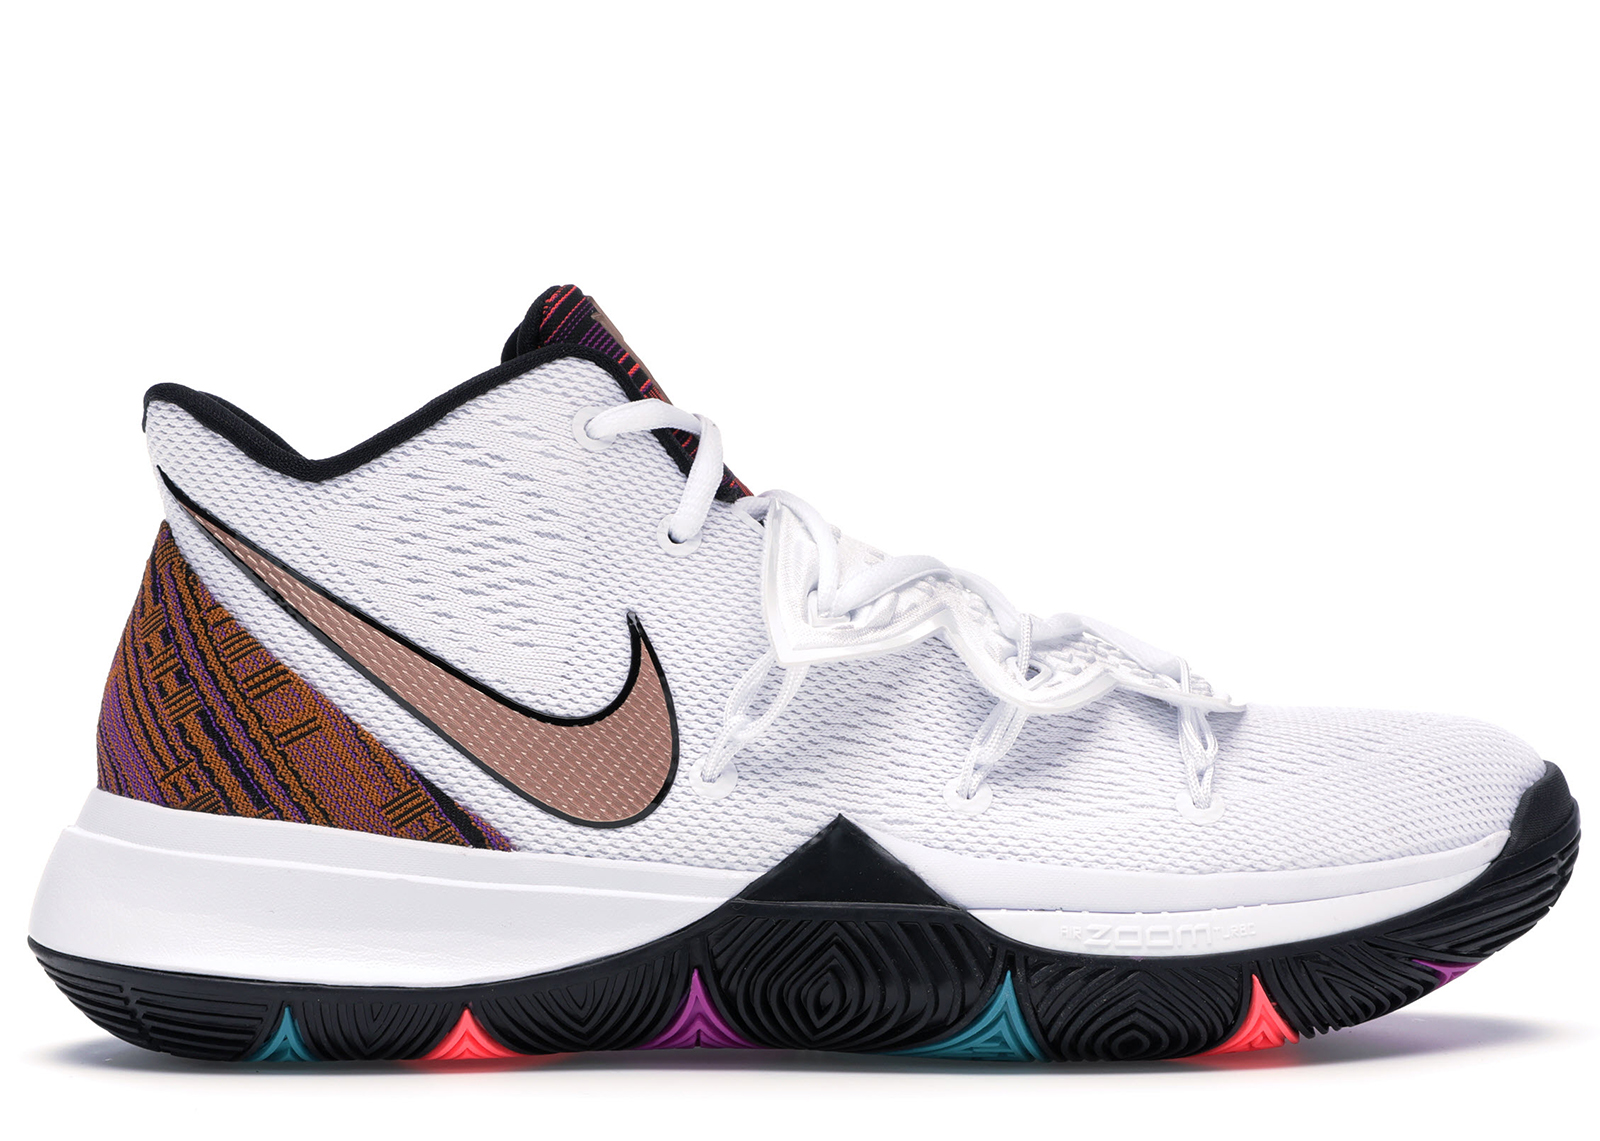 kyrie irving shoes bhm